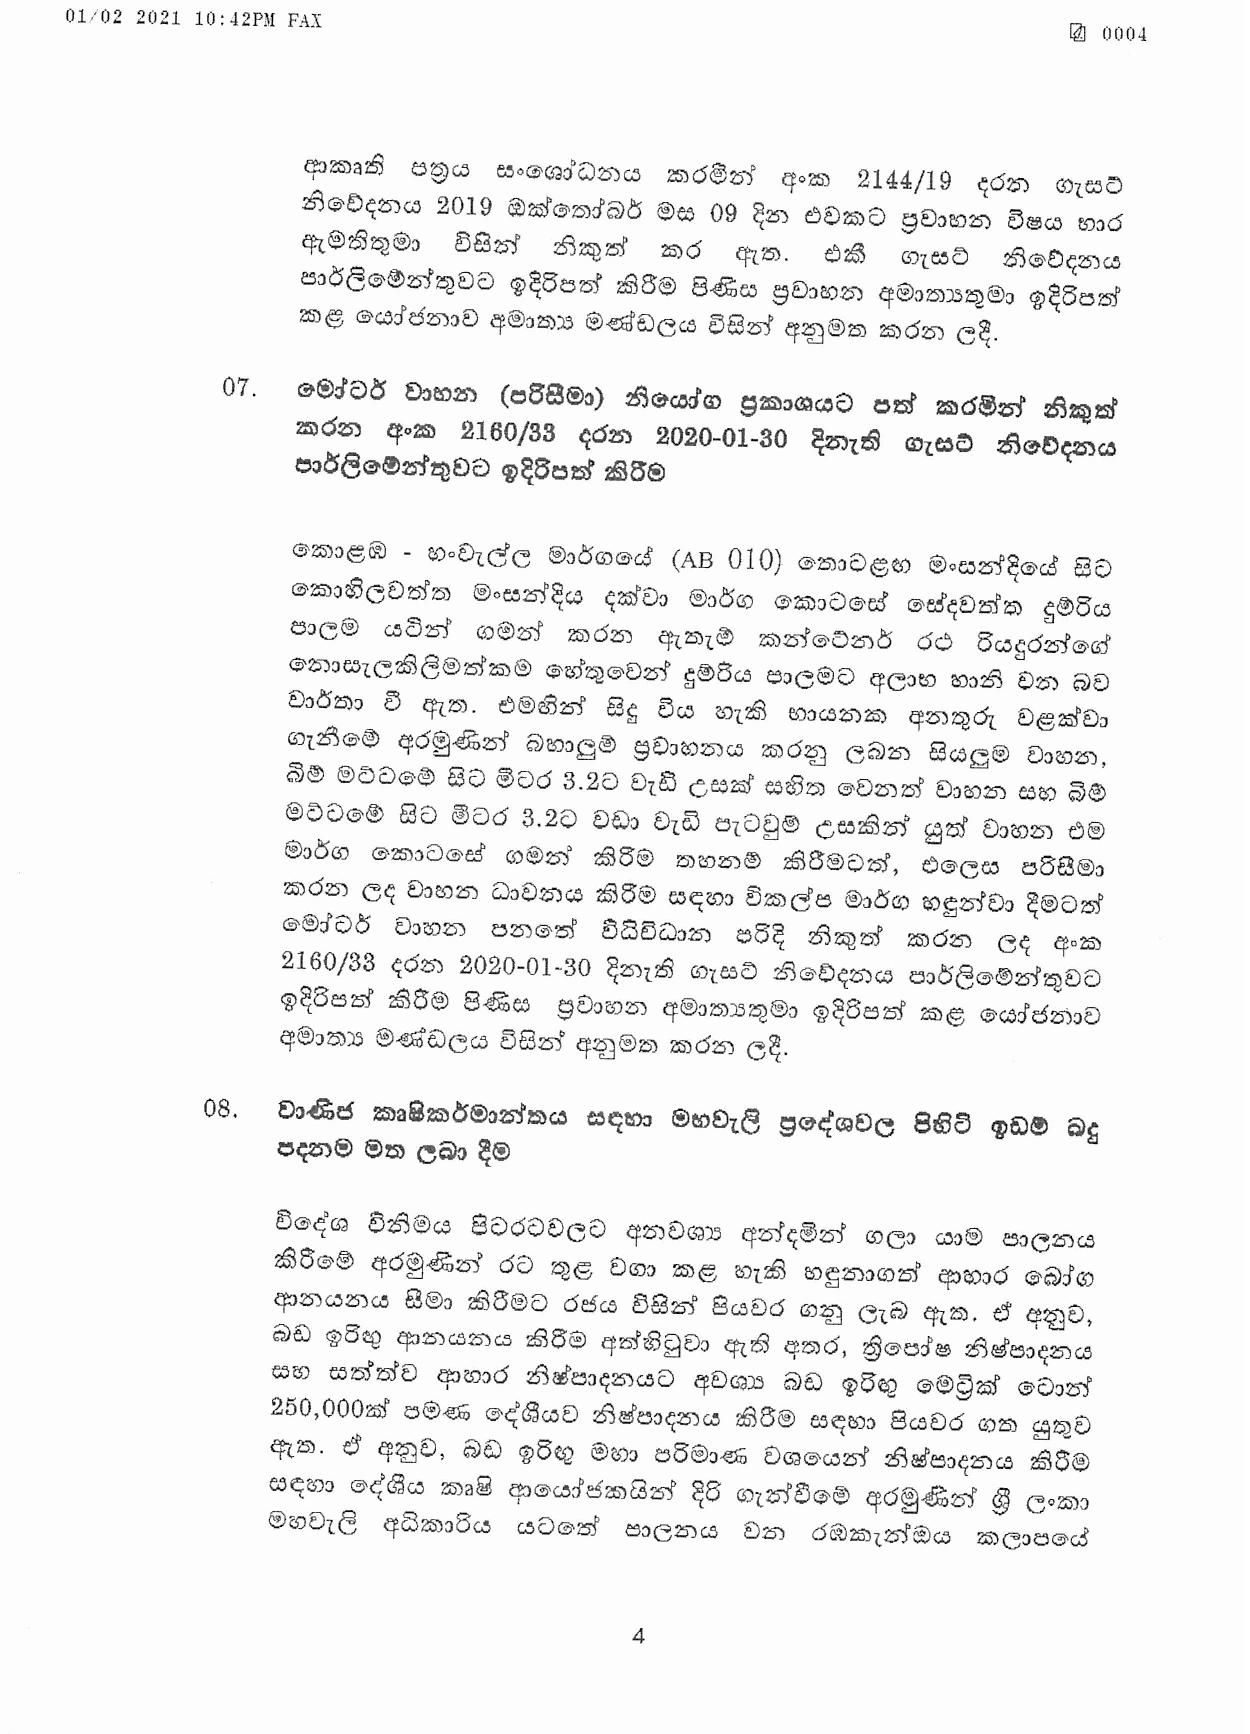 Cabinet Decision on 01.02.2021 page 004